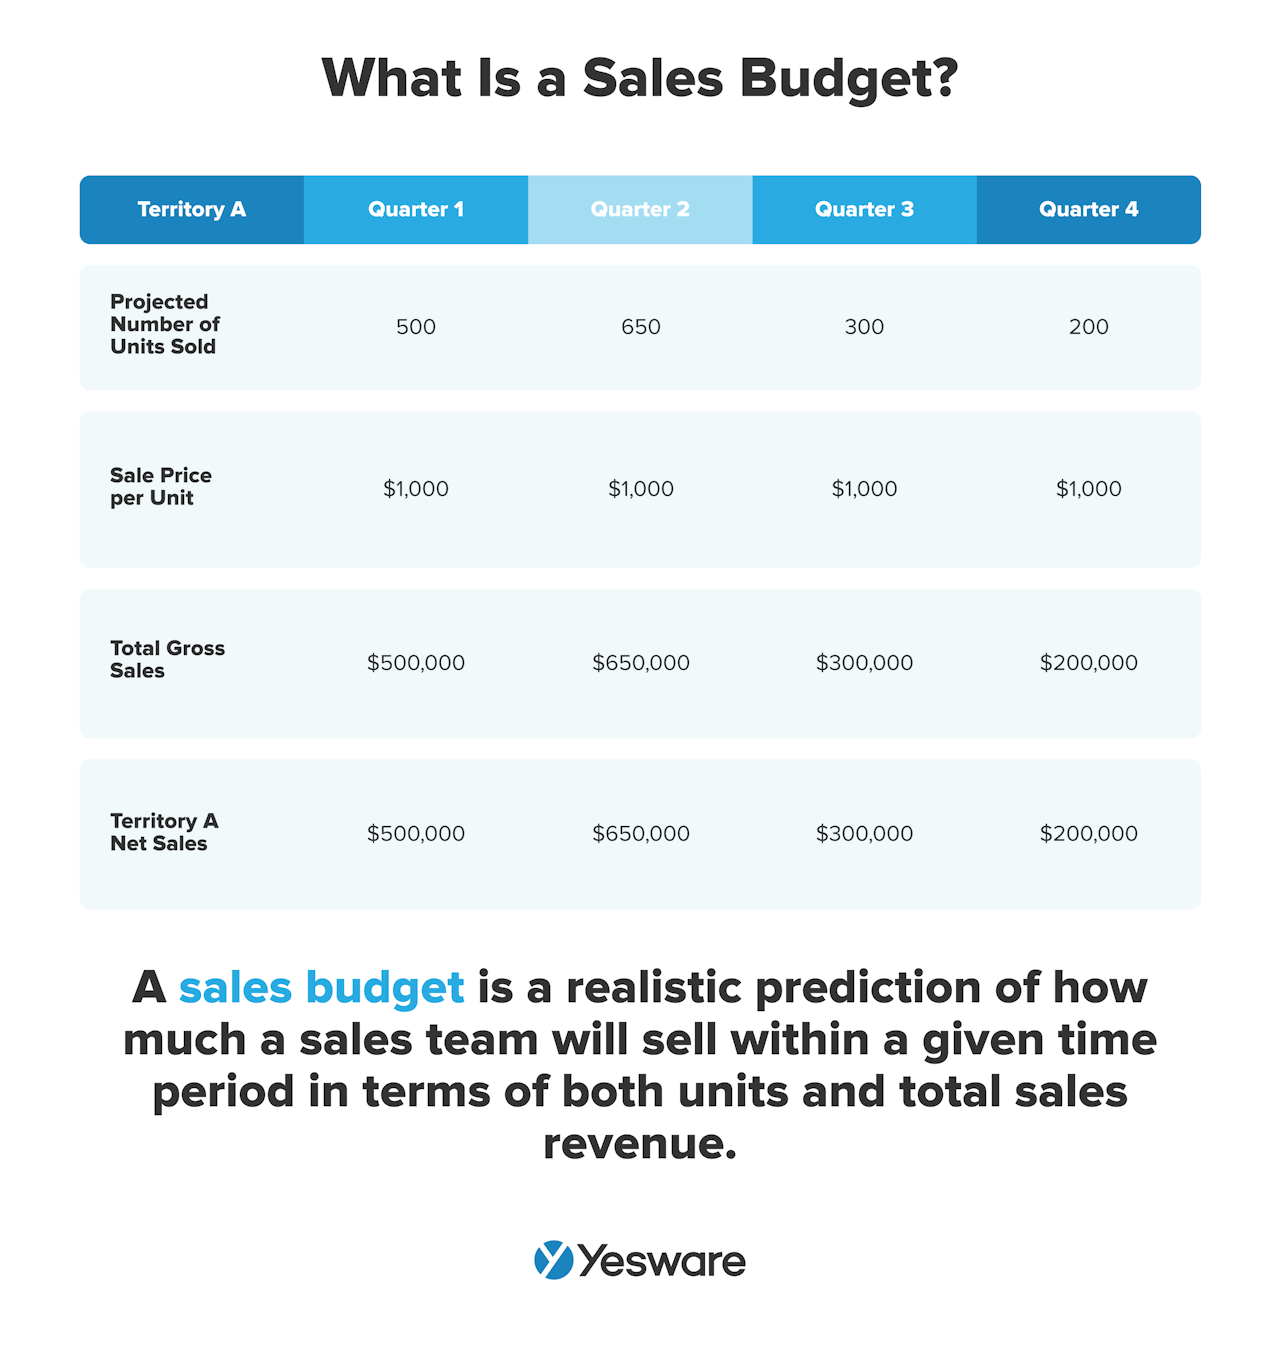 what is a sales budget?